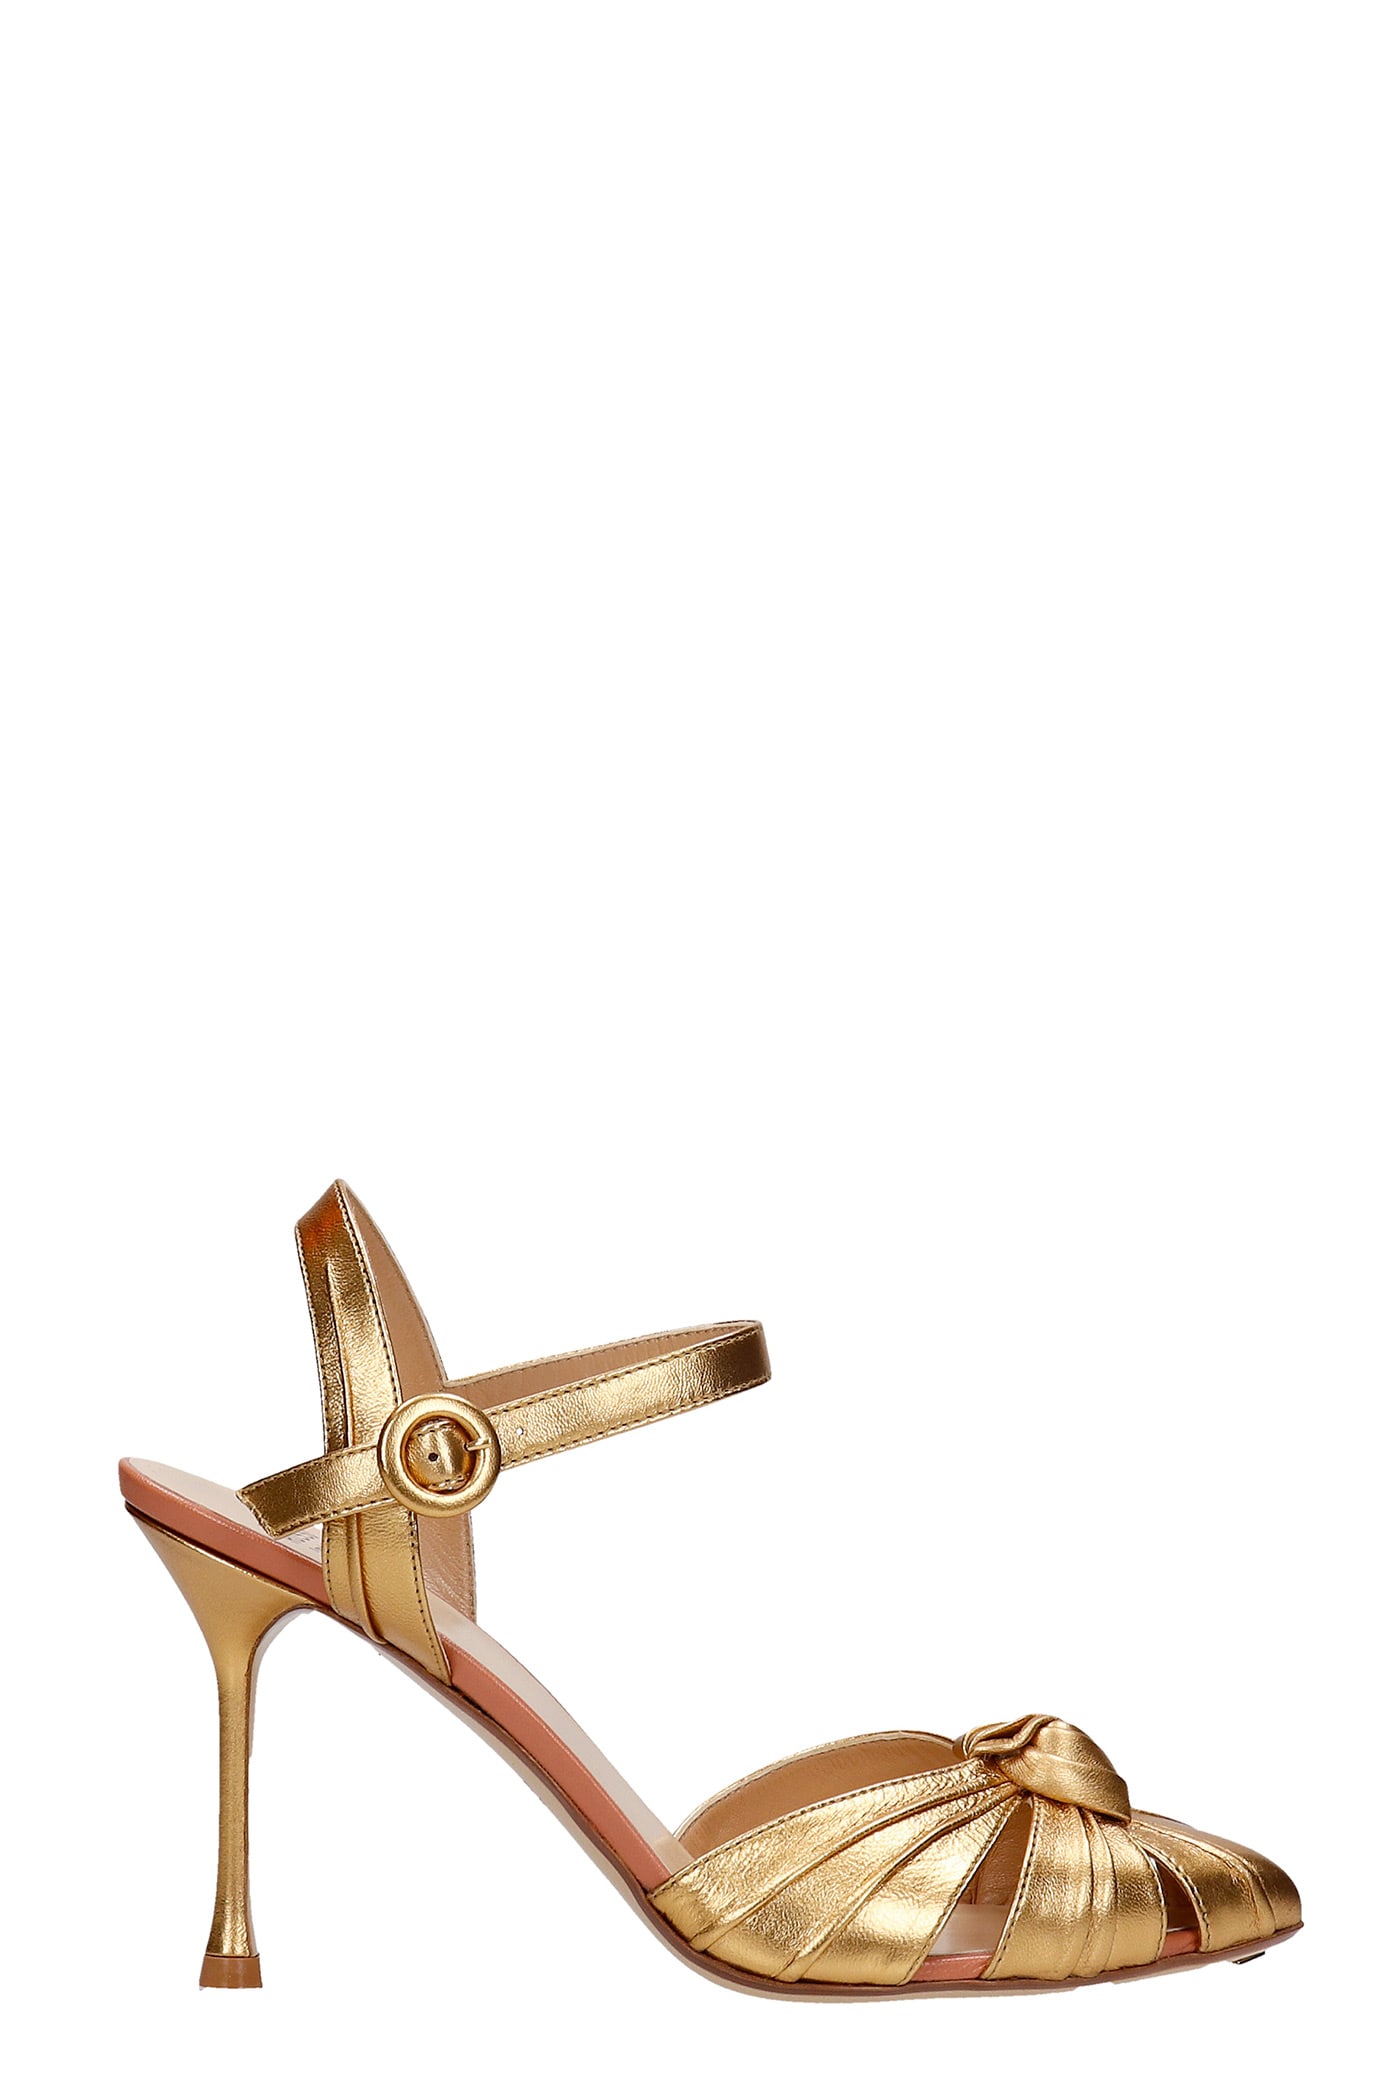 Buy Francesco Russo Sandals In Gold Leather online, shop Francesco Russo shoes with free shipping